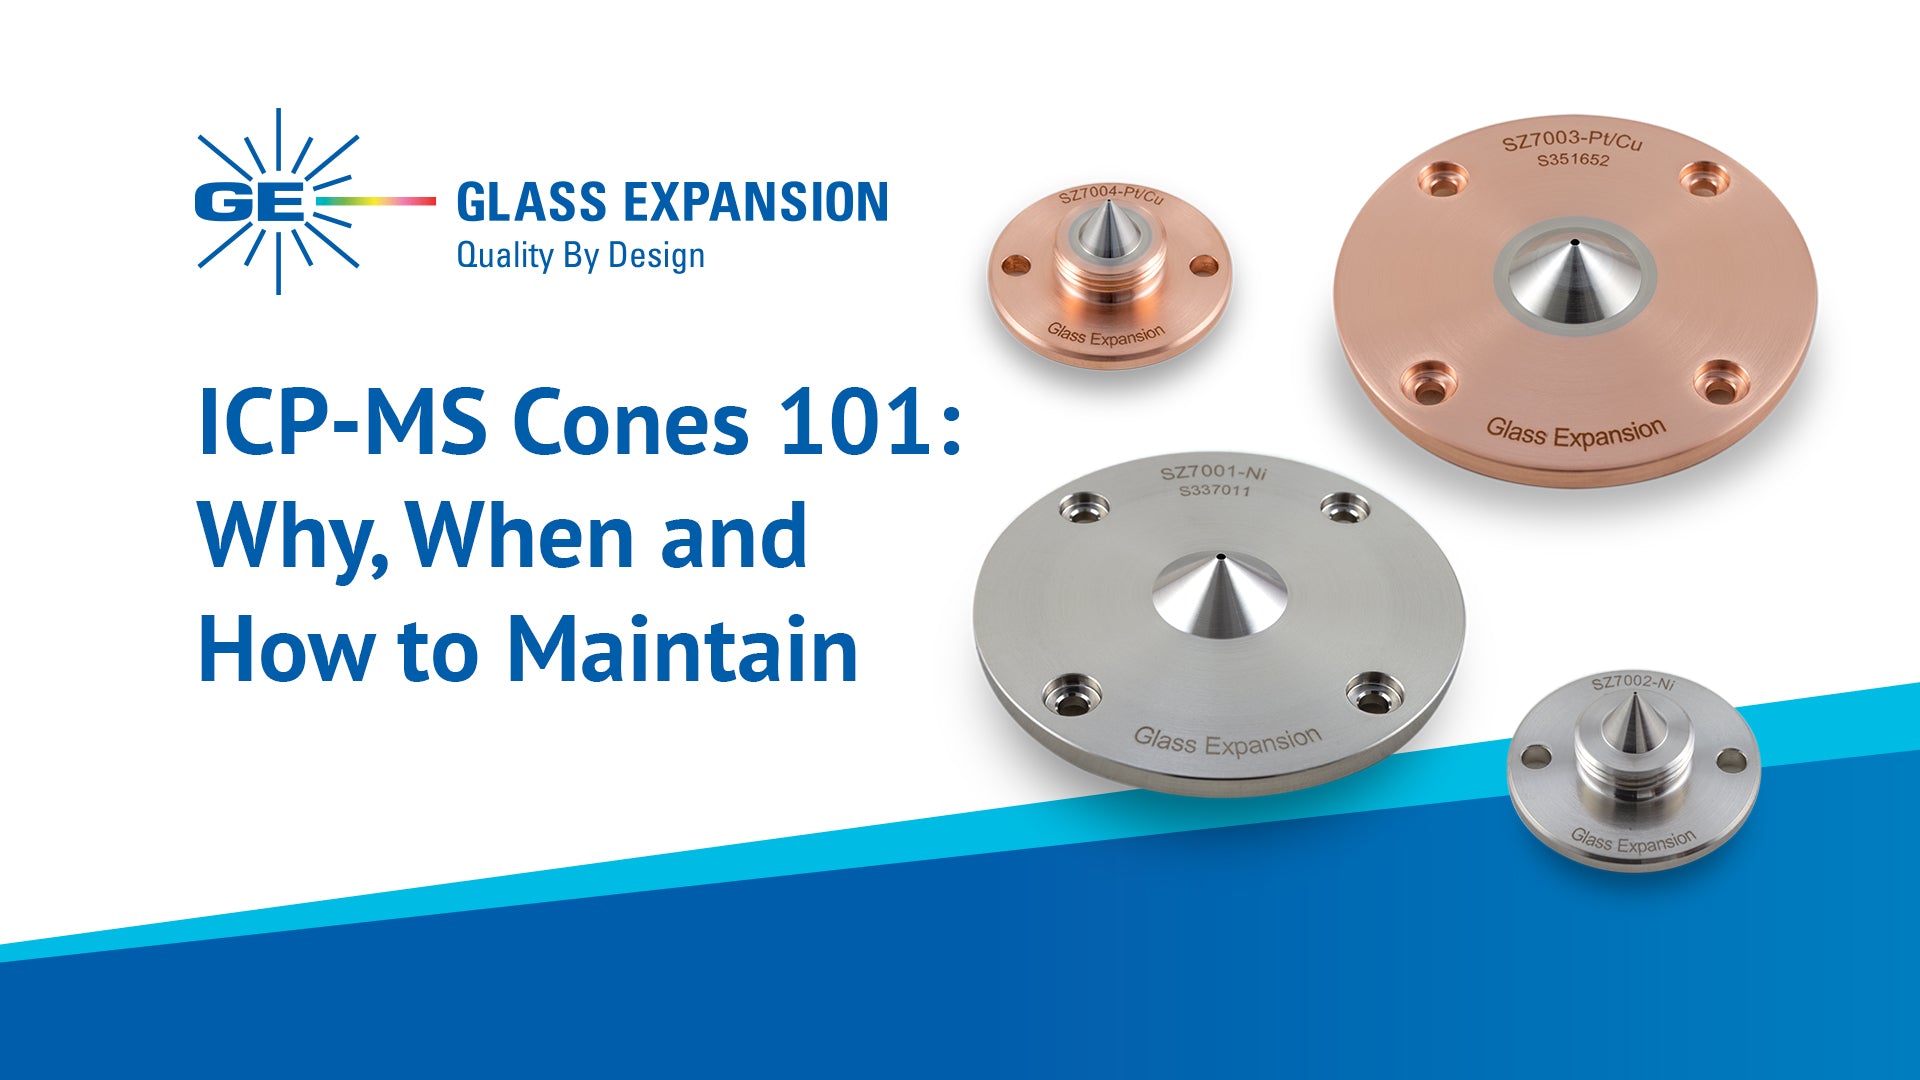 Glass Expansion Webinar - ICP-MS Cones 101